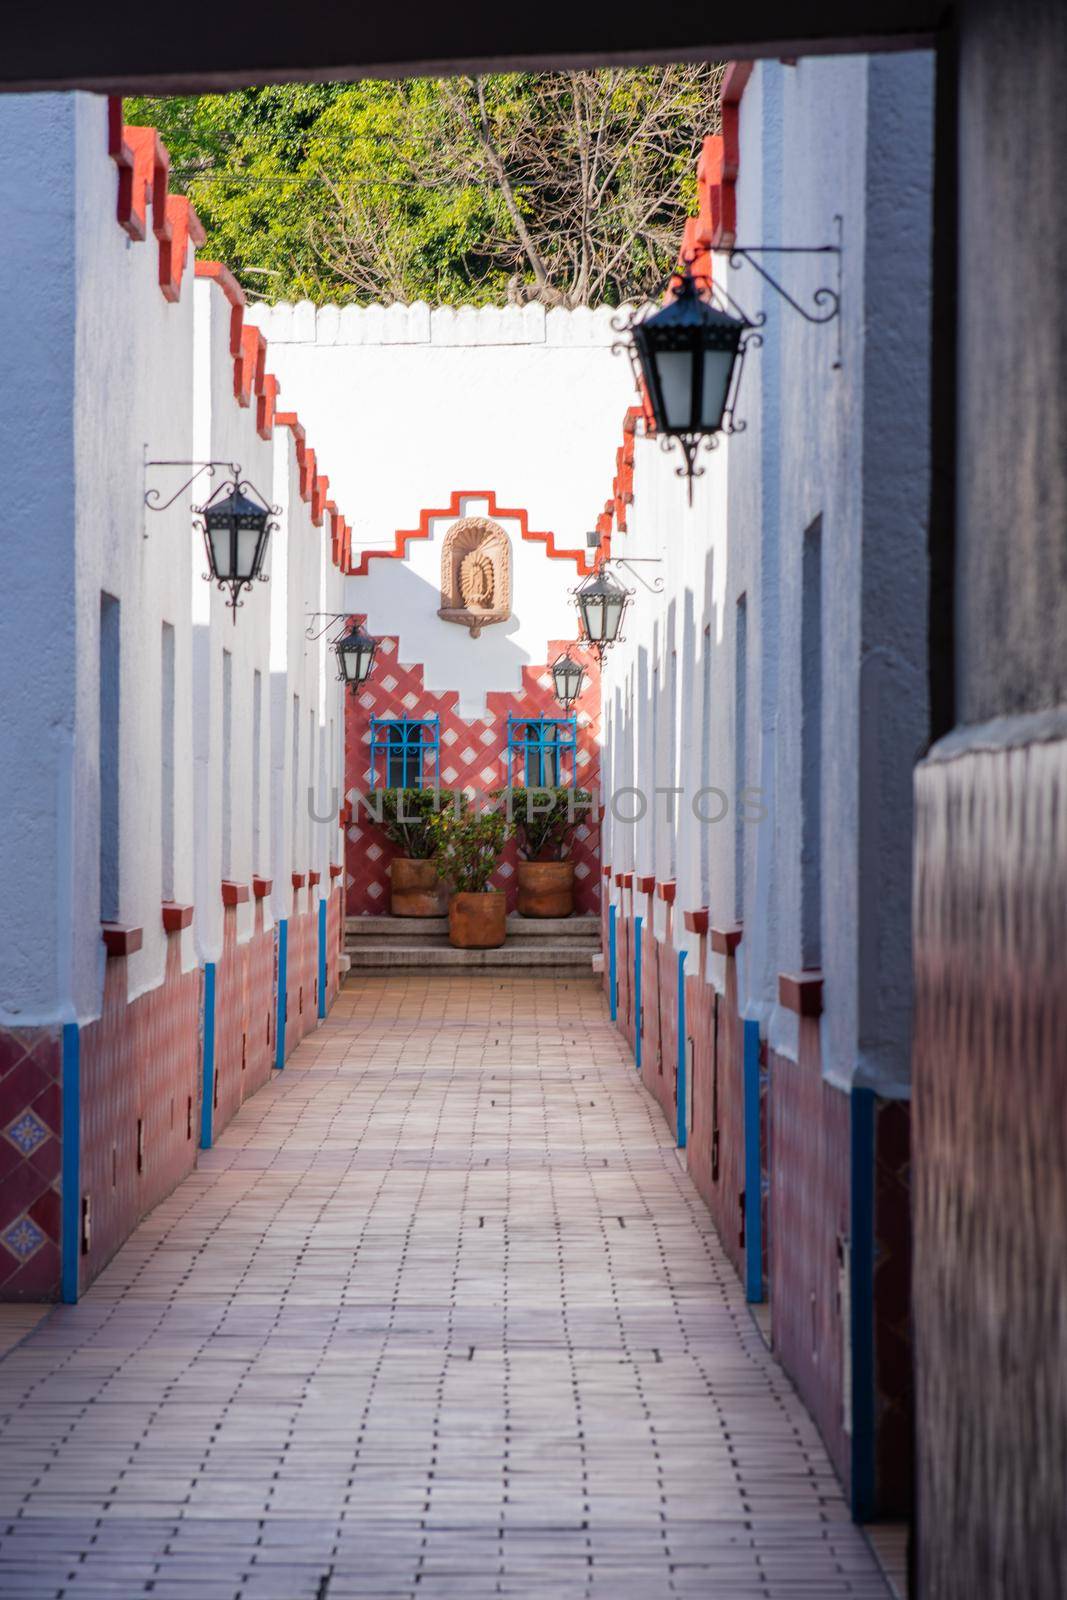 Hall in Mexico City with white walls, classic hanging lamps, and plants at the end. Long corridor with brown tiled floor and classic Hispanic architecture. Colorful Mexican neighborhood